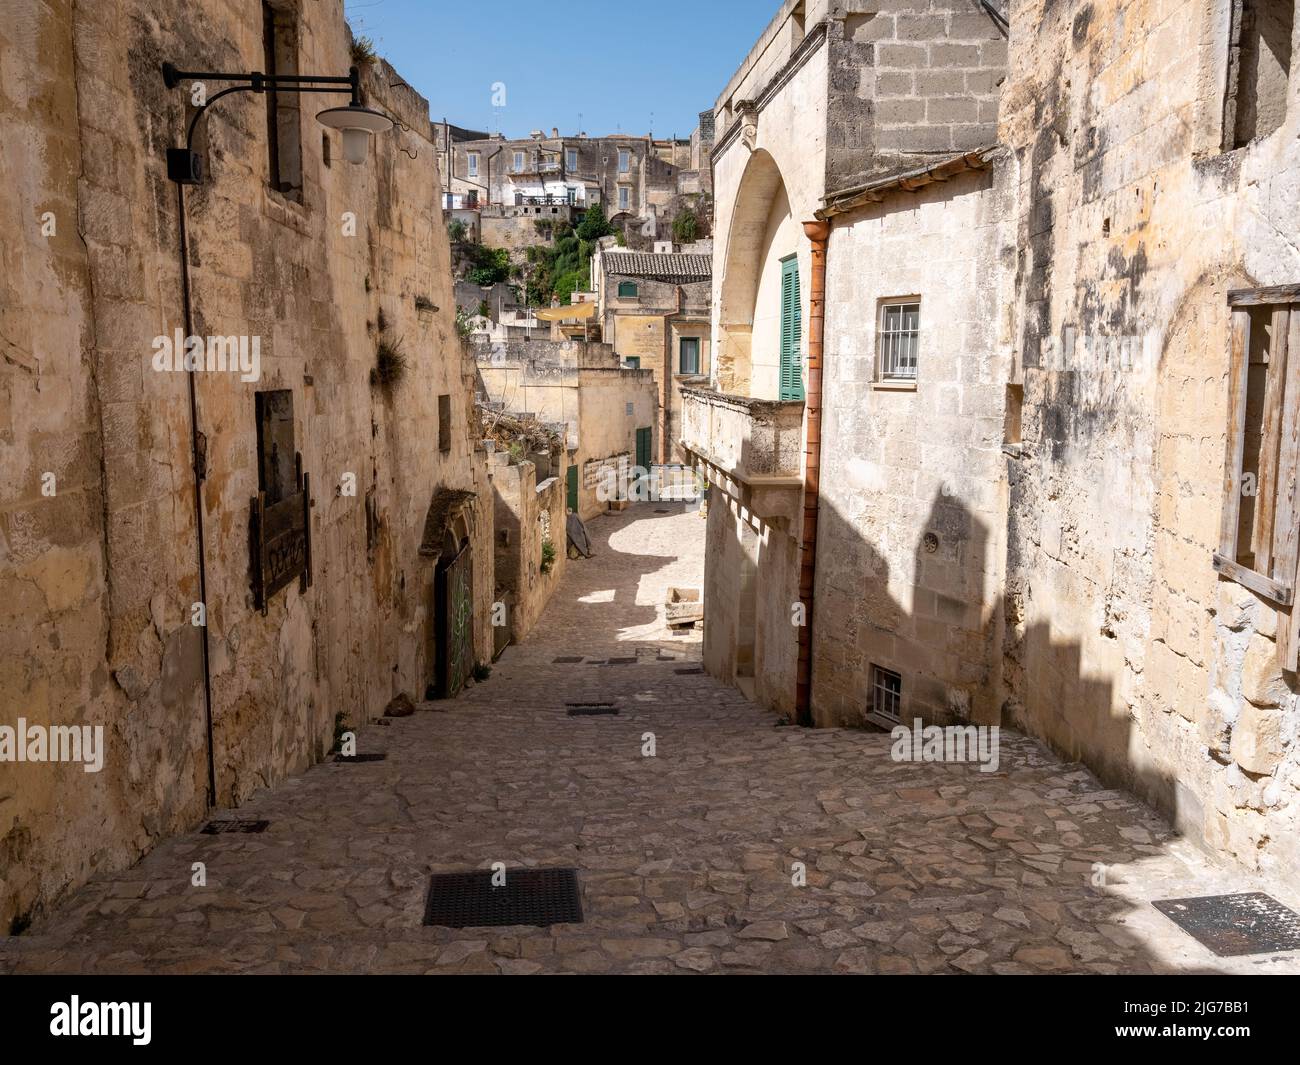 Steps heading uphill in the Old Town or Sassi of Matera, Italy with the silhouette of sculptures of human forms at the top of the stairs Stock Photo